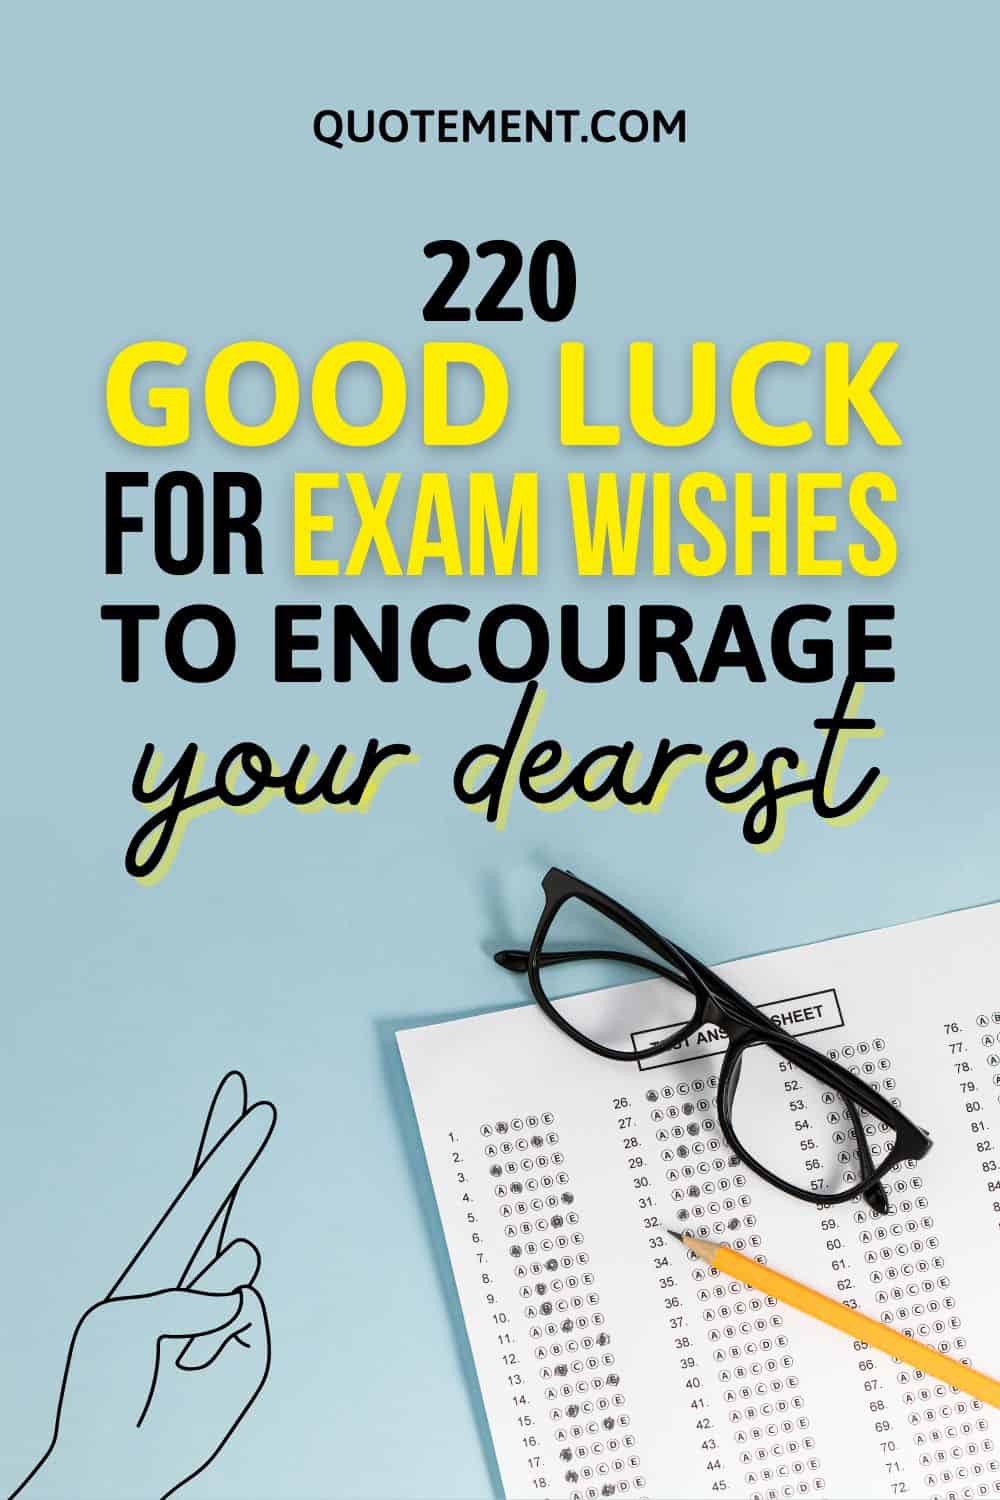 220 Good Luck For Exam Wishes To Encourage Your Dearest